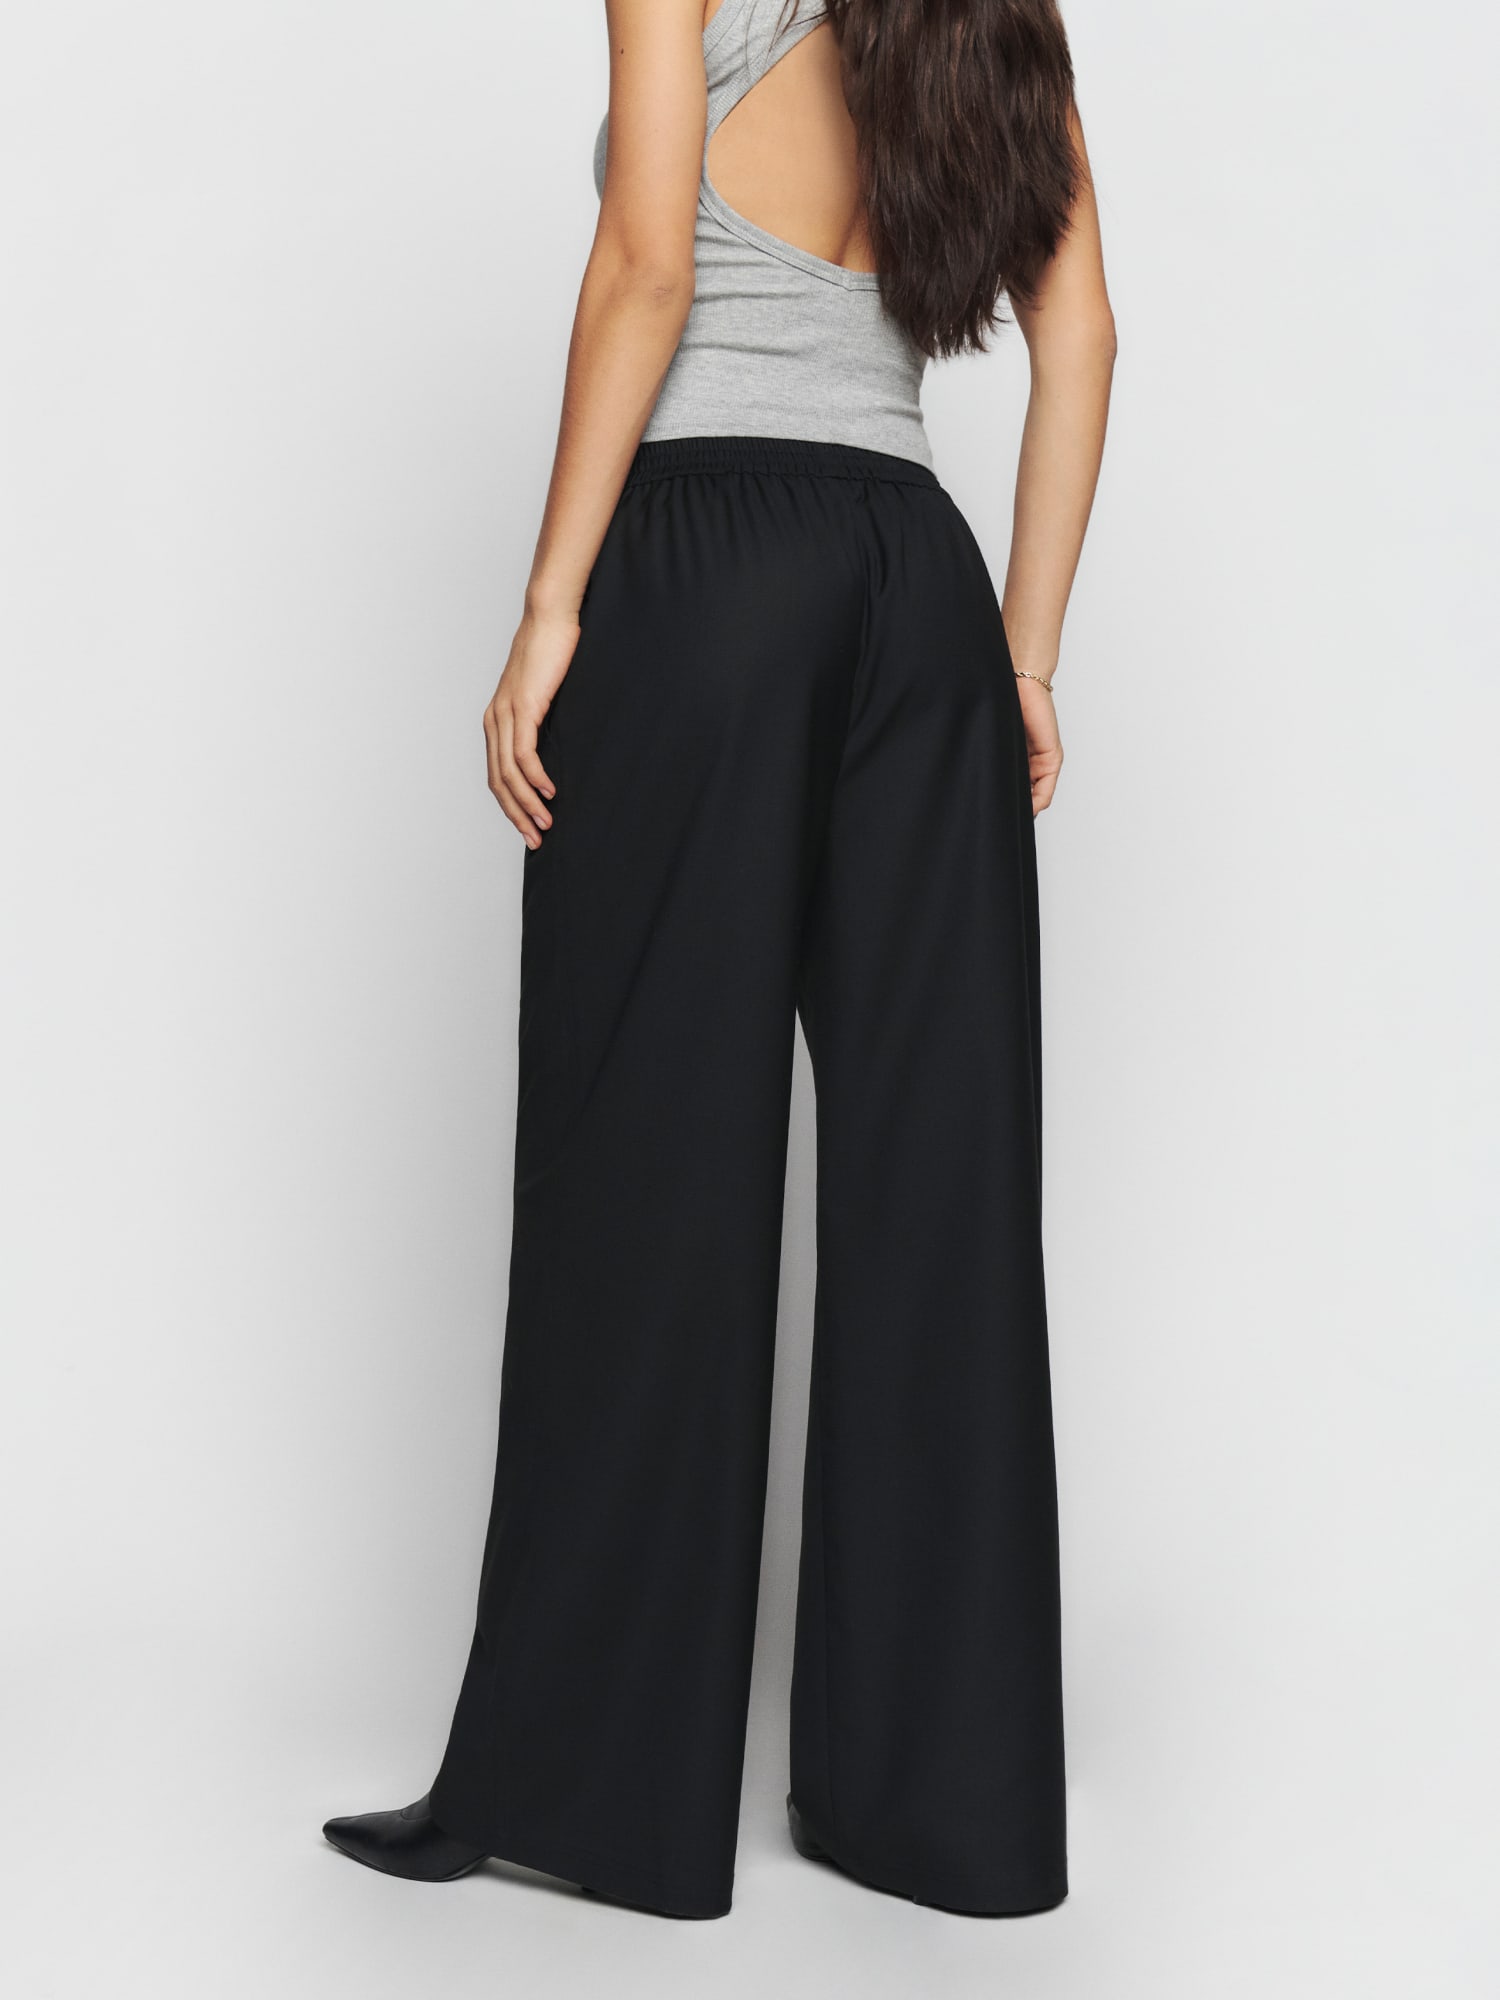 The Kyle Pants: High Waisted Wide Leg Dress Pant– MomQueenBoutique